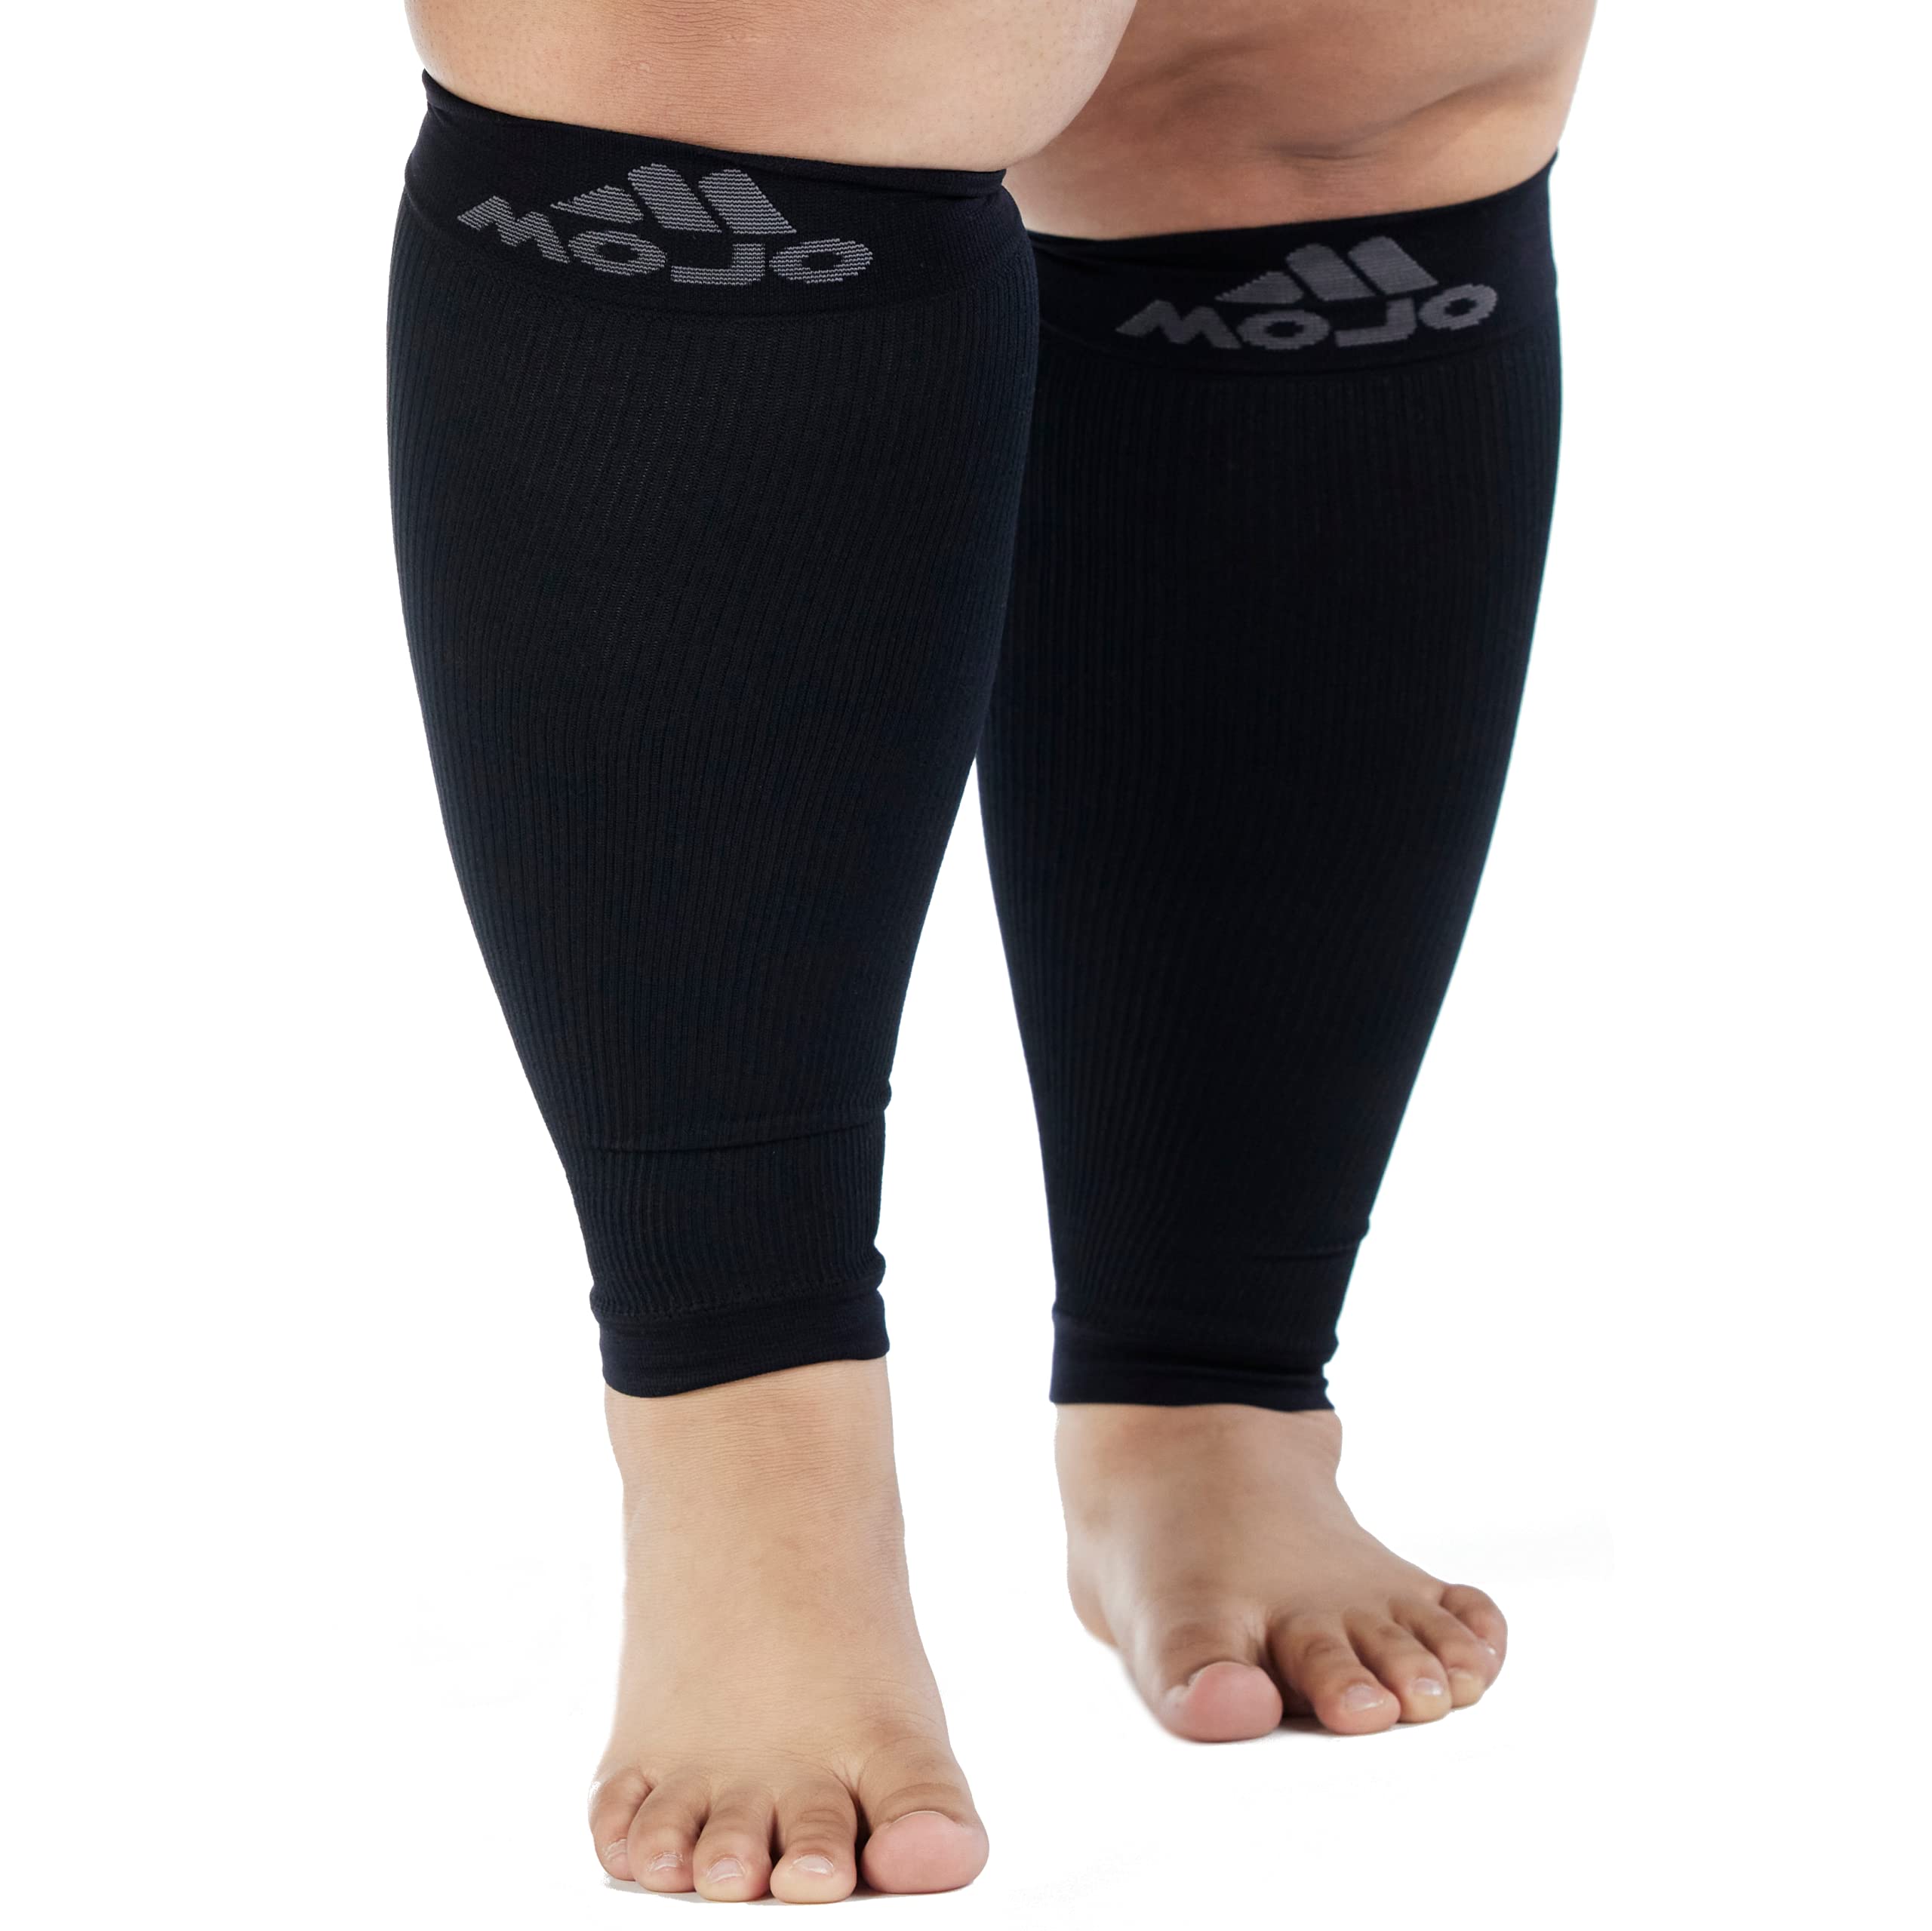 Mojo Compression Socks Graduated Compression Calf Sleeves for Swelling and  Shin Splints Support - Plus Size 20-30mmHg, Small-7XL, Black, White, Pink,  Grey - 1 Pair 5X-Large Black